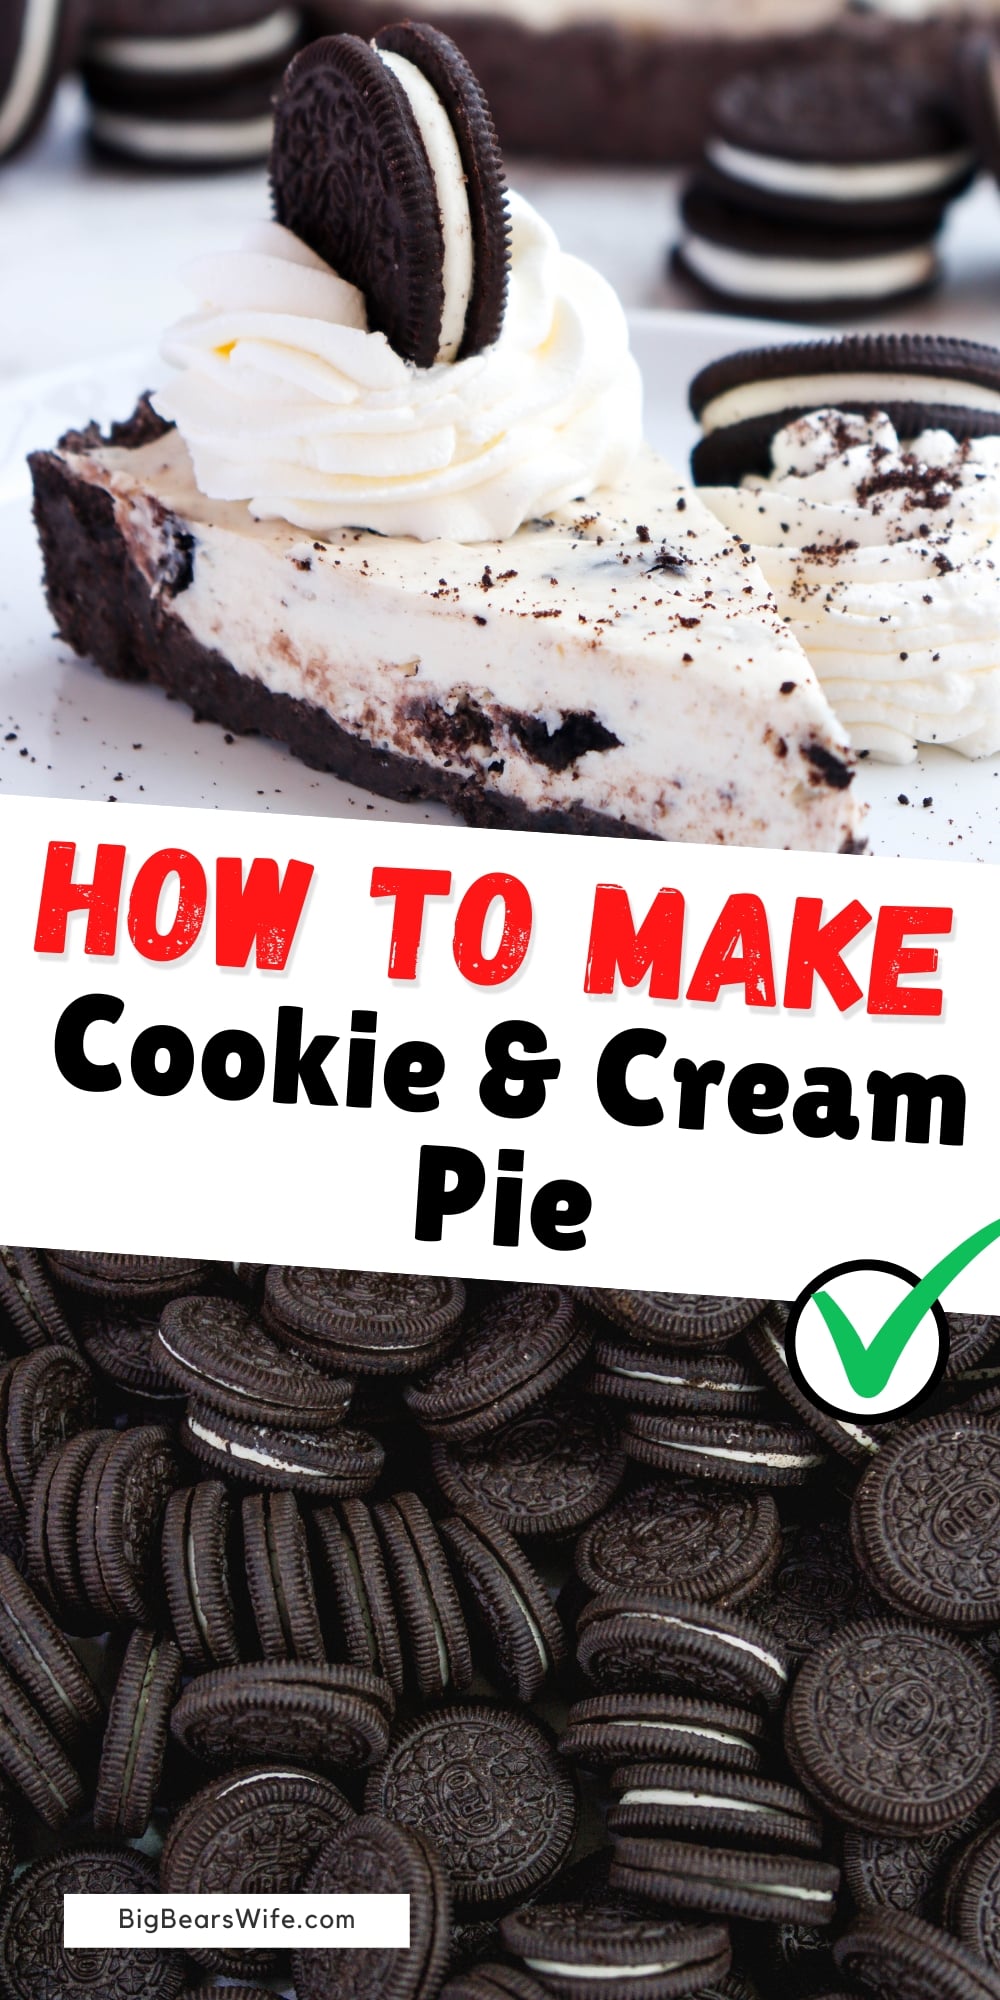 Are you looking for a dessert that is sure to impress your guests or satisfy your sweet tooth? Look no further than cookies and cream pie! This delicious dessert is perfect for any occasion, from dinner parties to solo indulgence. via @bigbearswife